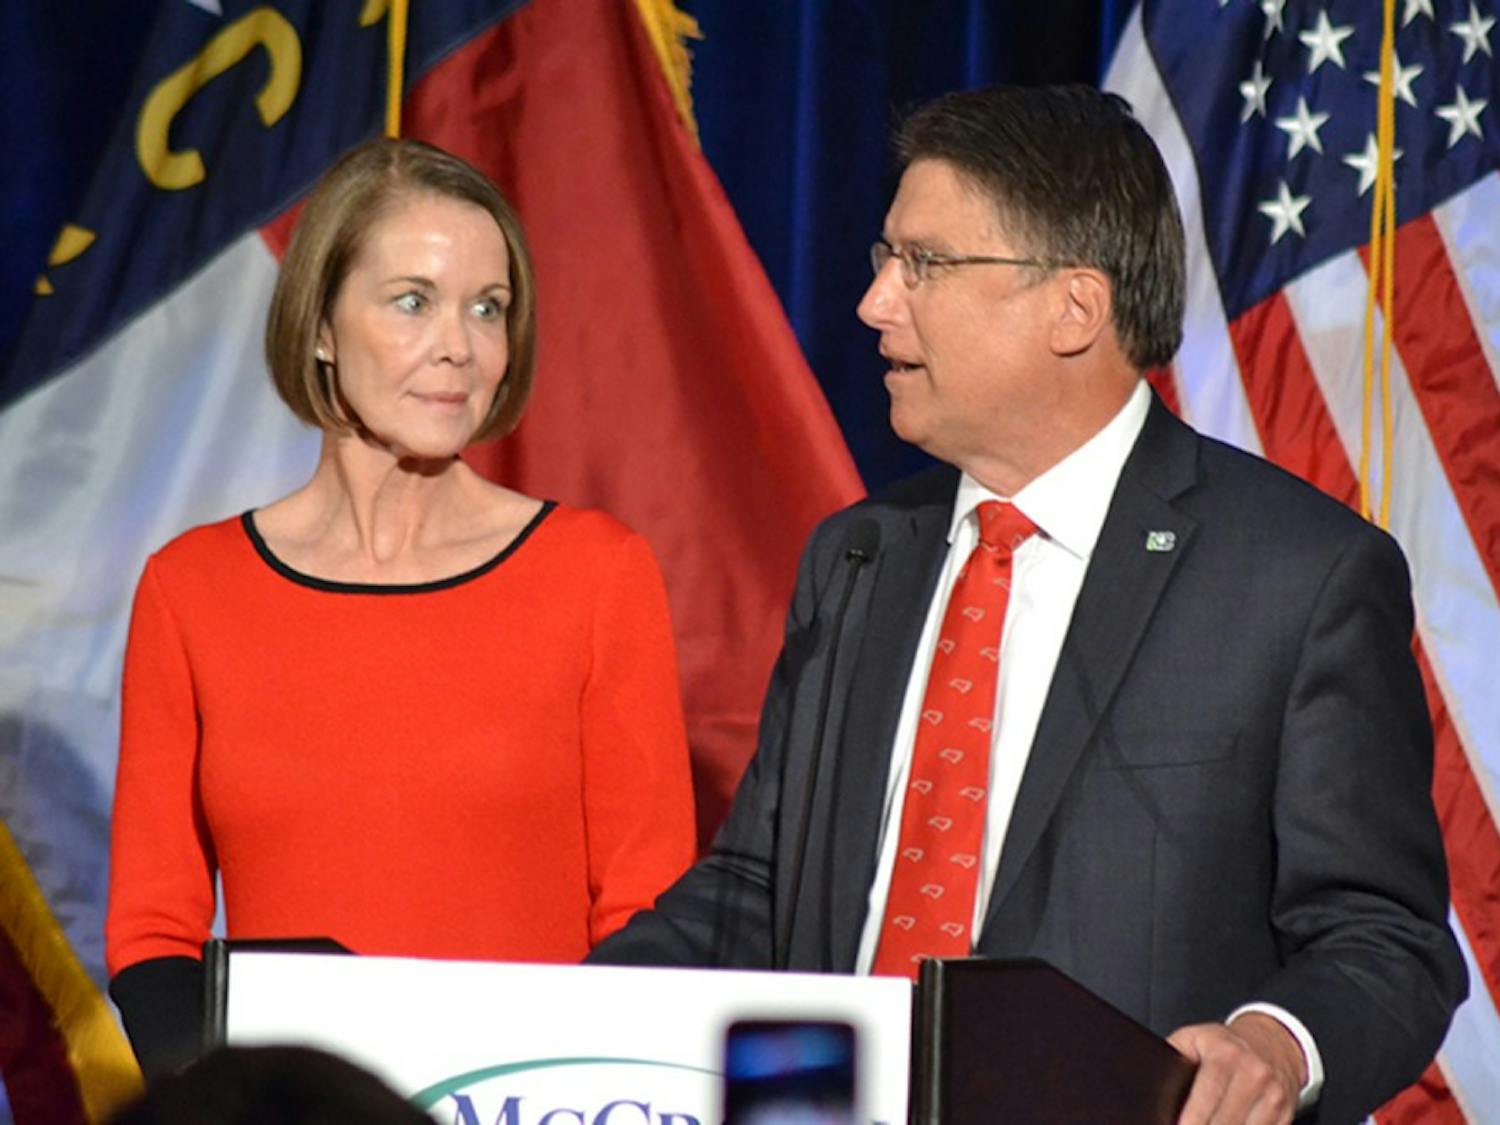 Former Governor&nbsp;Pat McCrory speaks on Election night in November. He was chased down by protestors in Washington, D.C. which caused proposals for a bill to increase security for former governors.&nbsp;